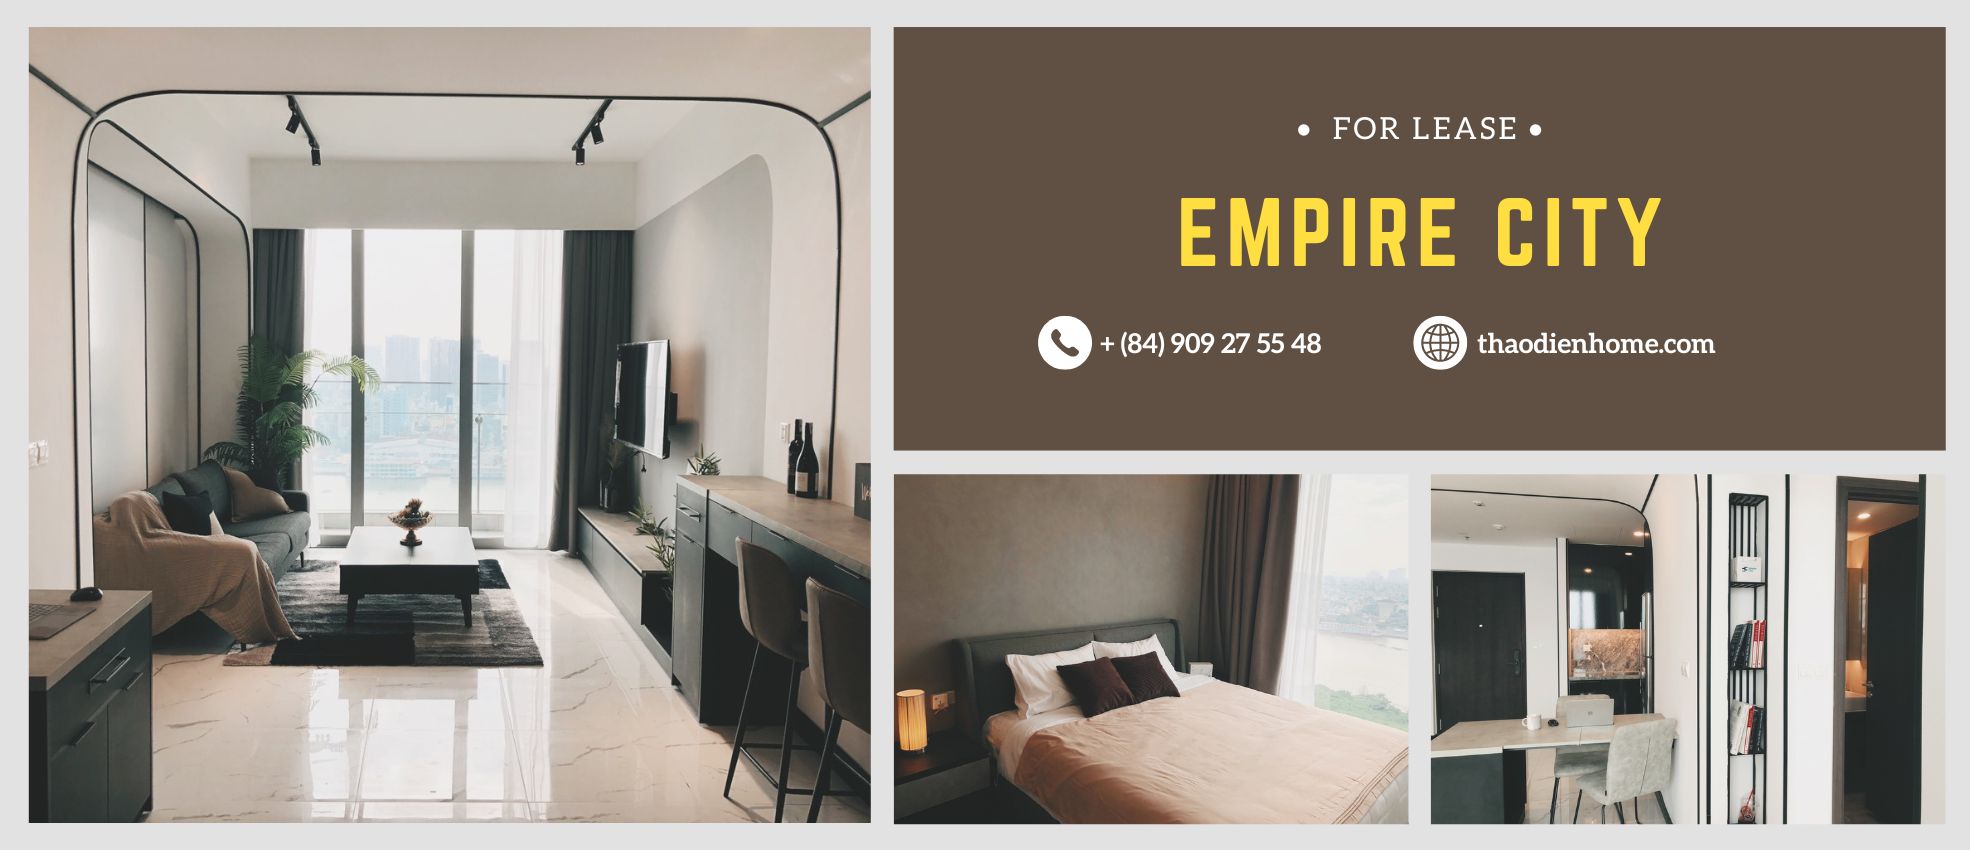 Sophisticated & Quiet 1BR Apartment at Tilia Residence – Empire City with City & River Views